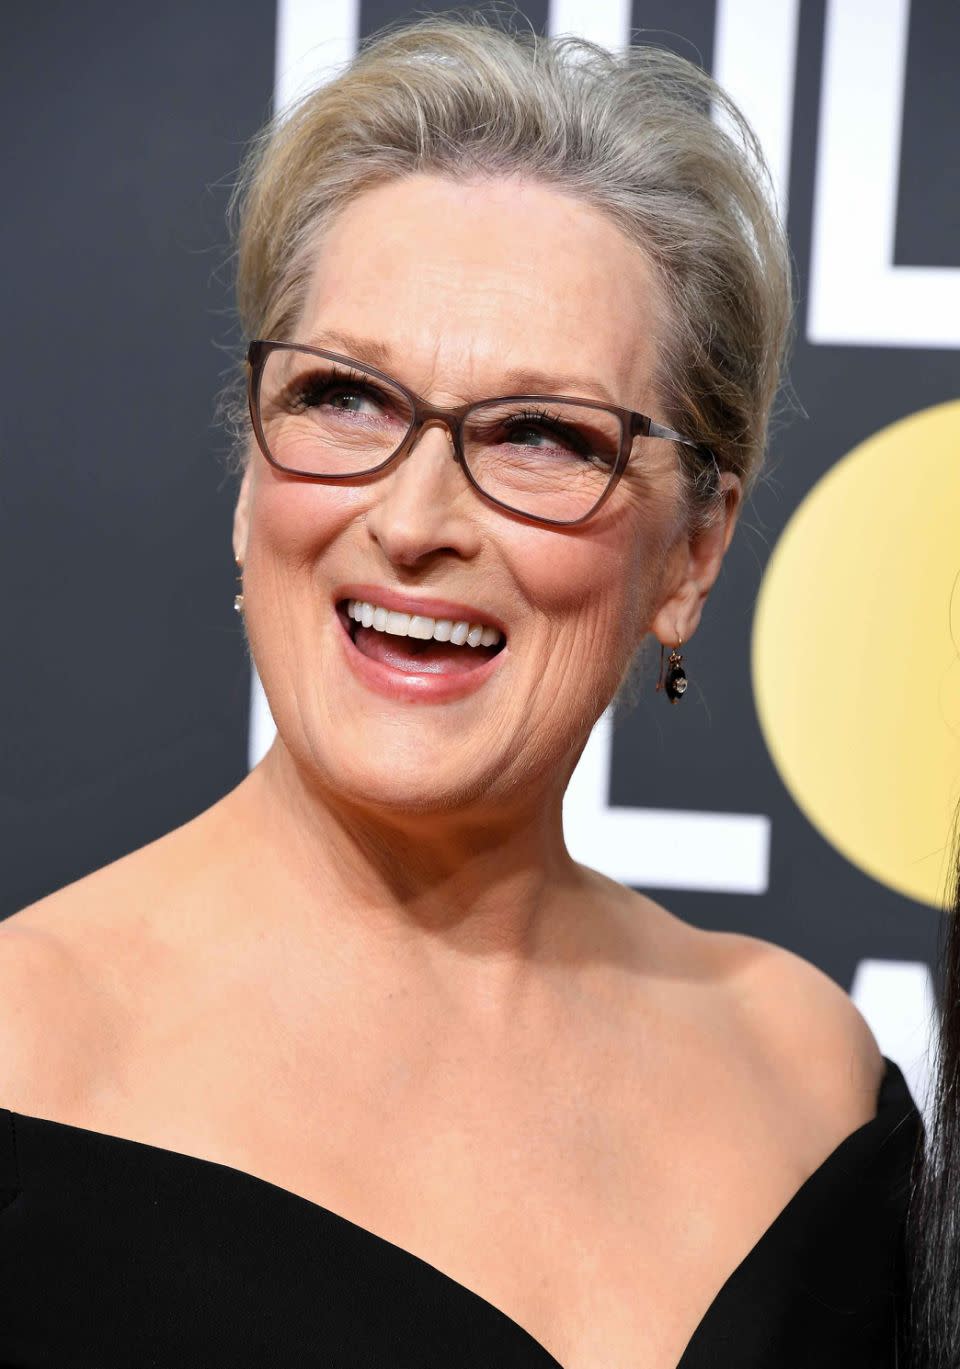 Meryl Streep, here on the Golden Globes red carpet, fully supports Oprah's potential bid for president in 2020. Source: Getty